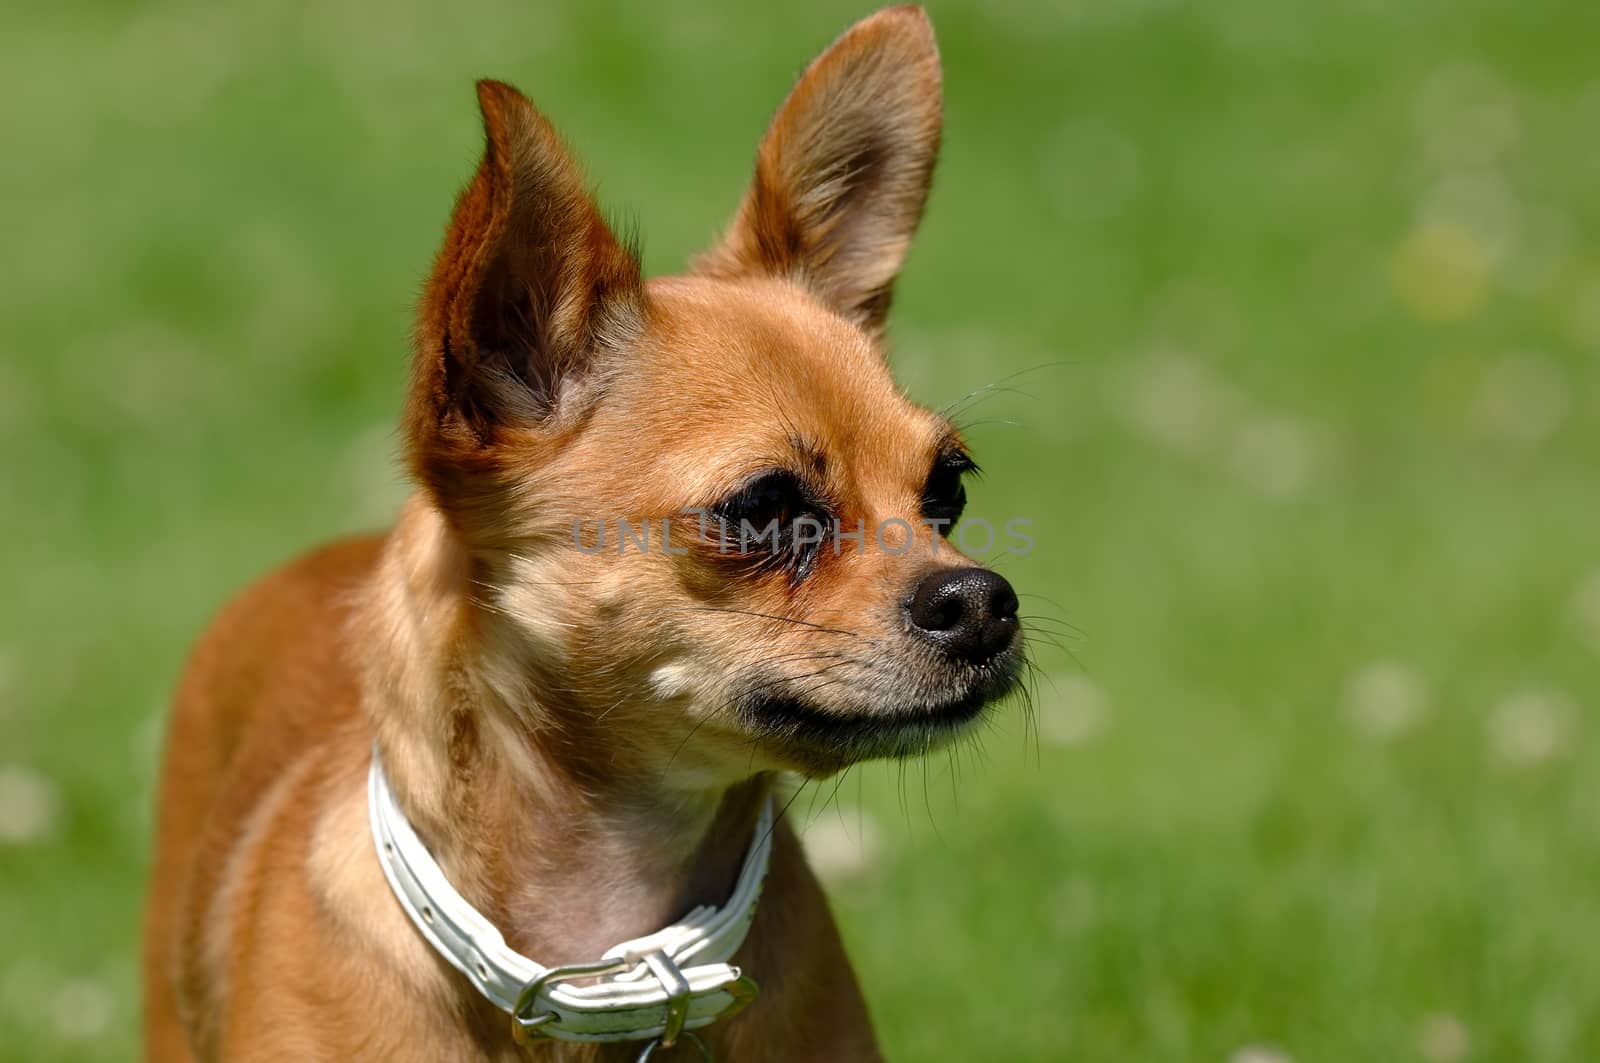 Chihuahua puppy dog is standing on green grass